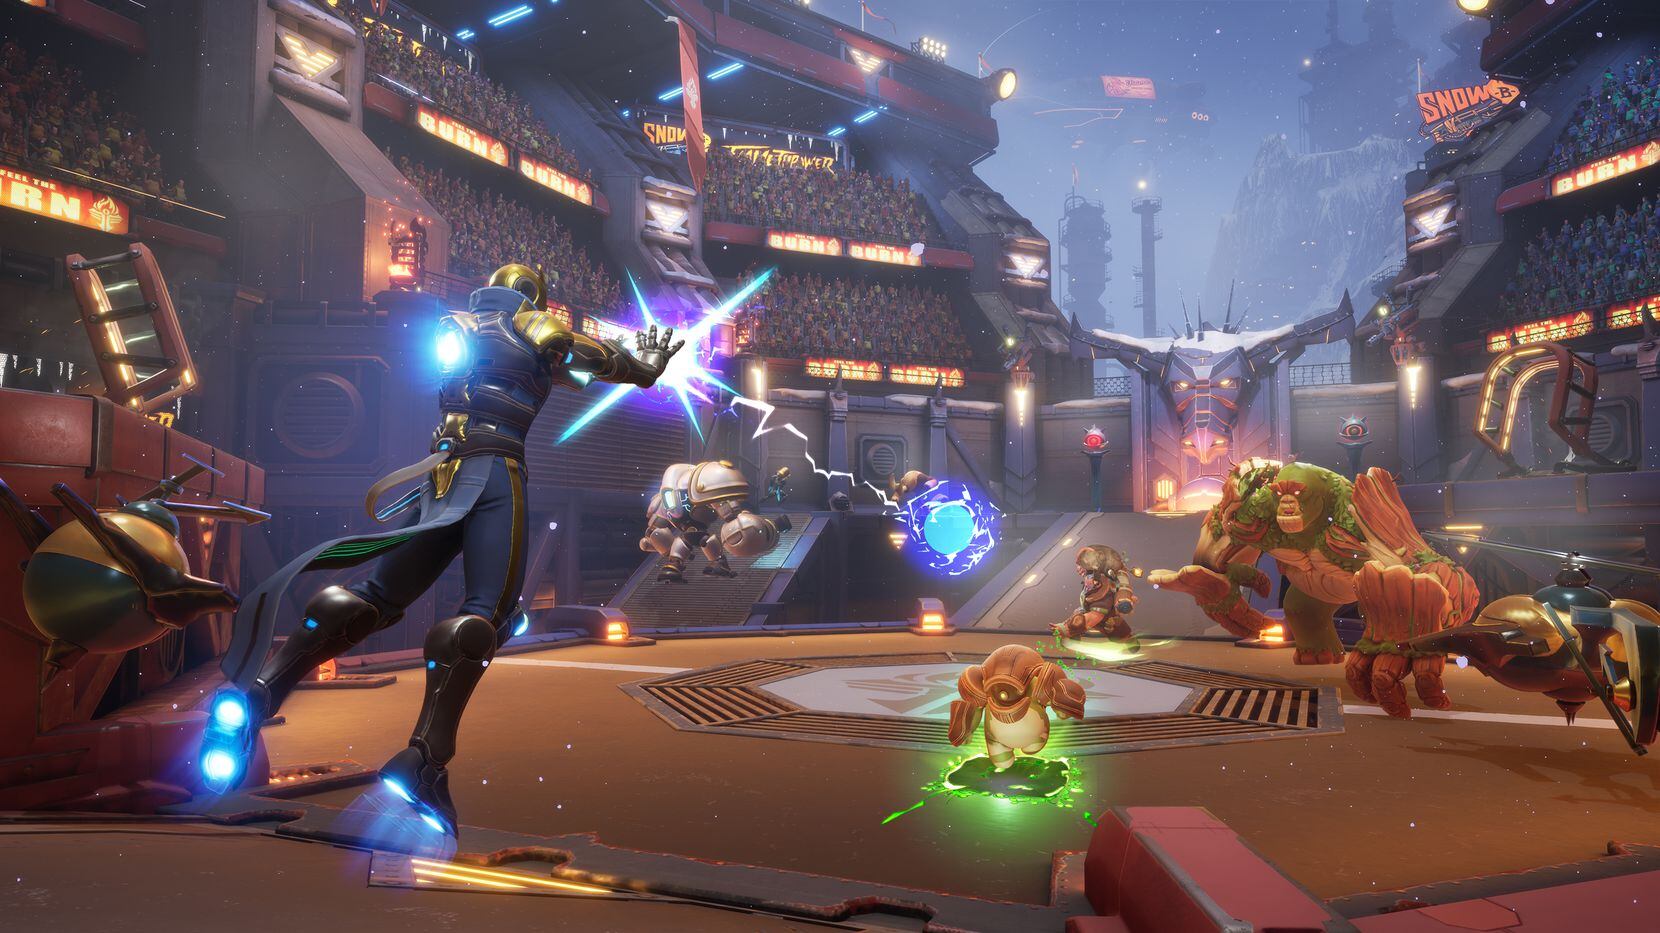 This game play capture shows game characters engaging in an arena-style battle.